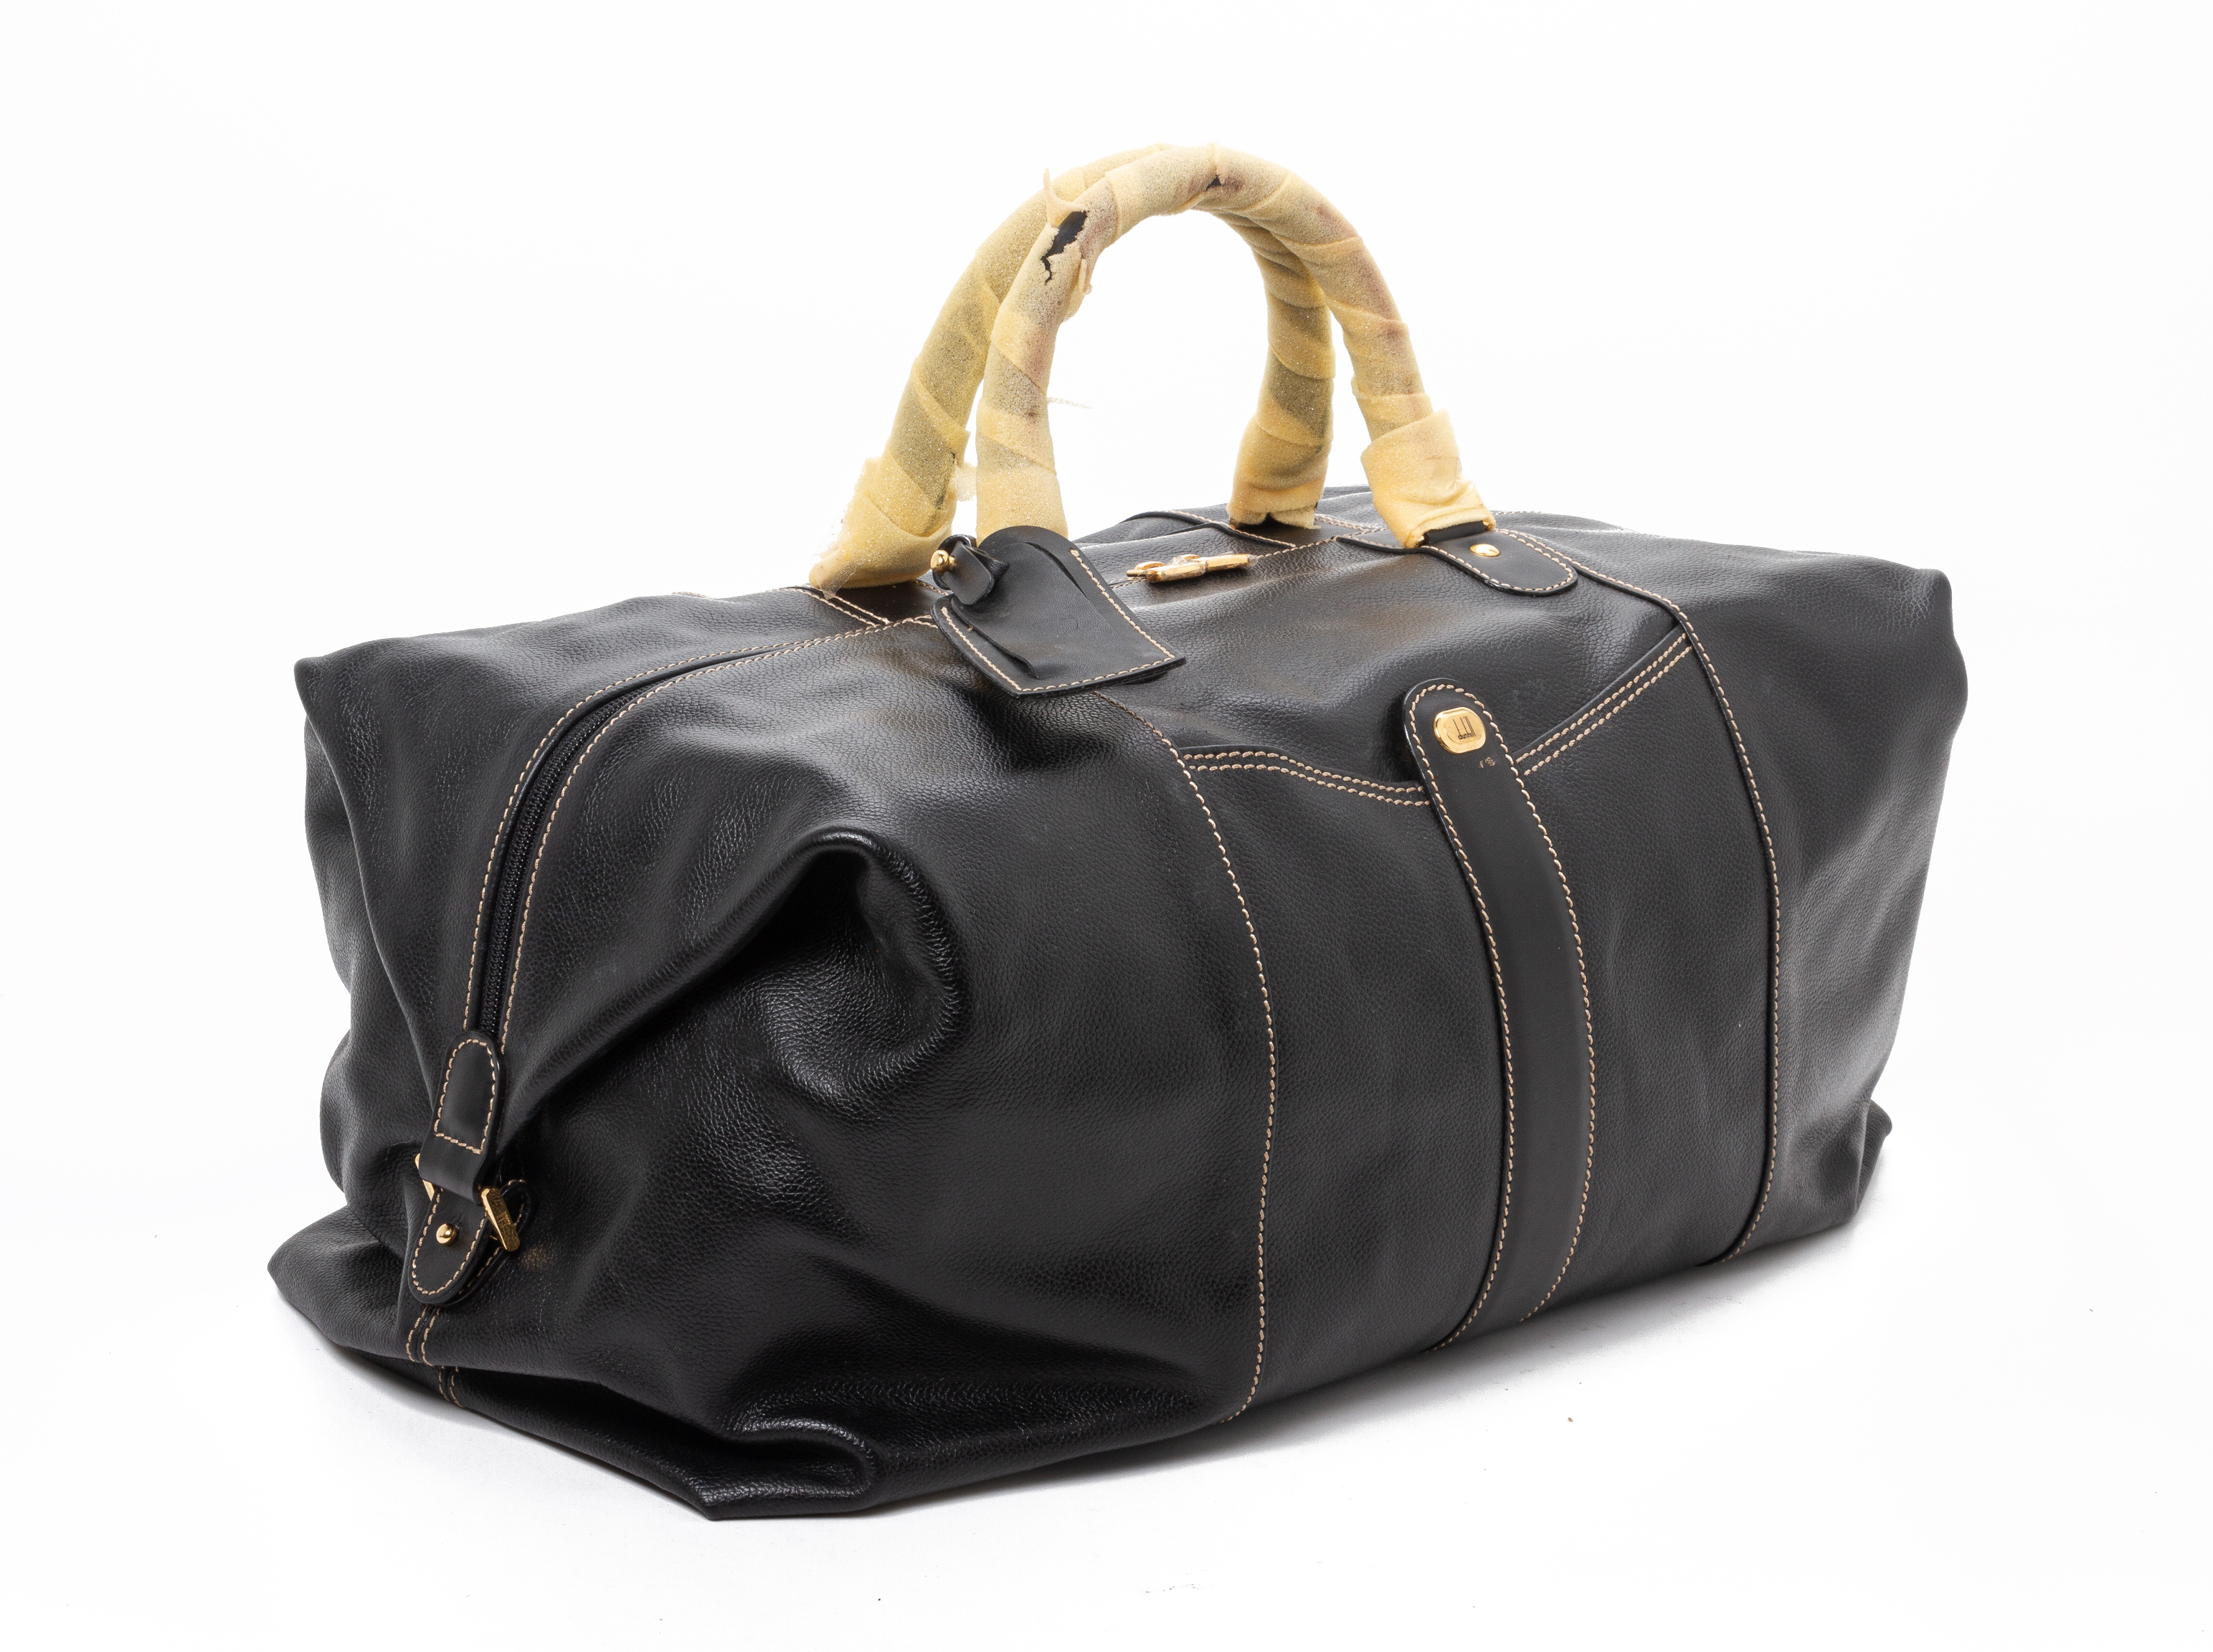 TWO DUNHILL LEATHER HOLDALLS - Image 2 of 9